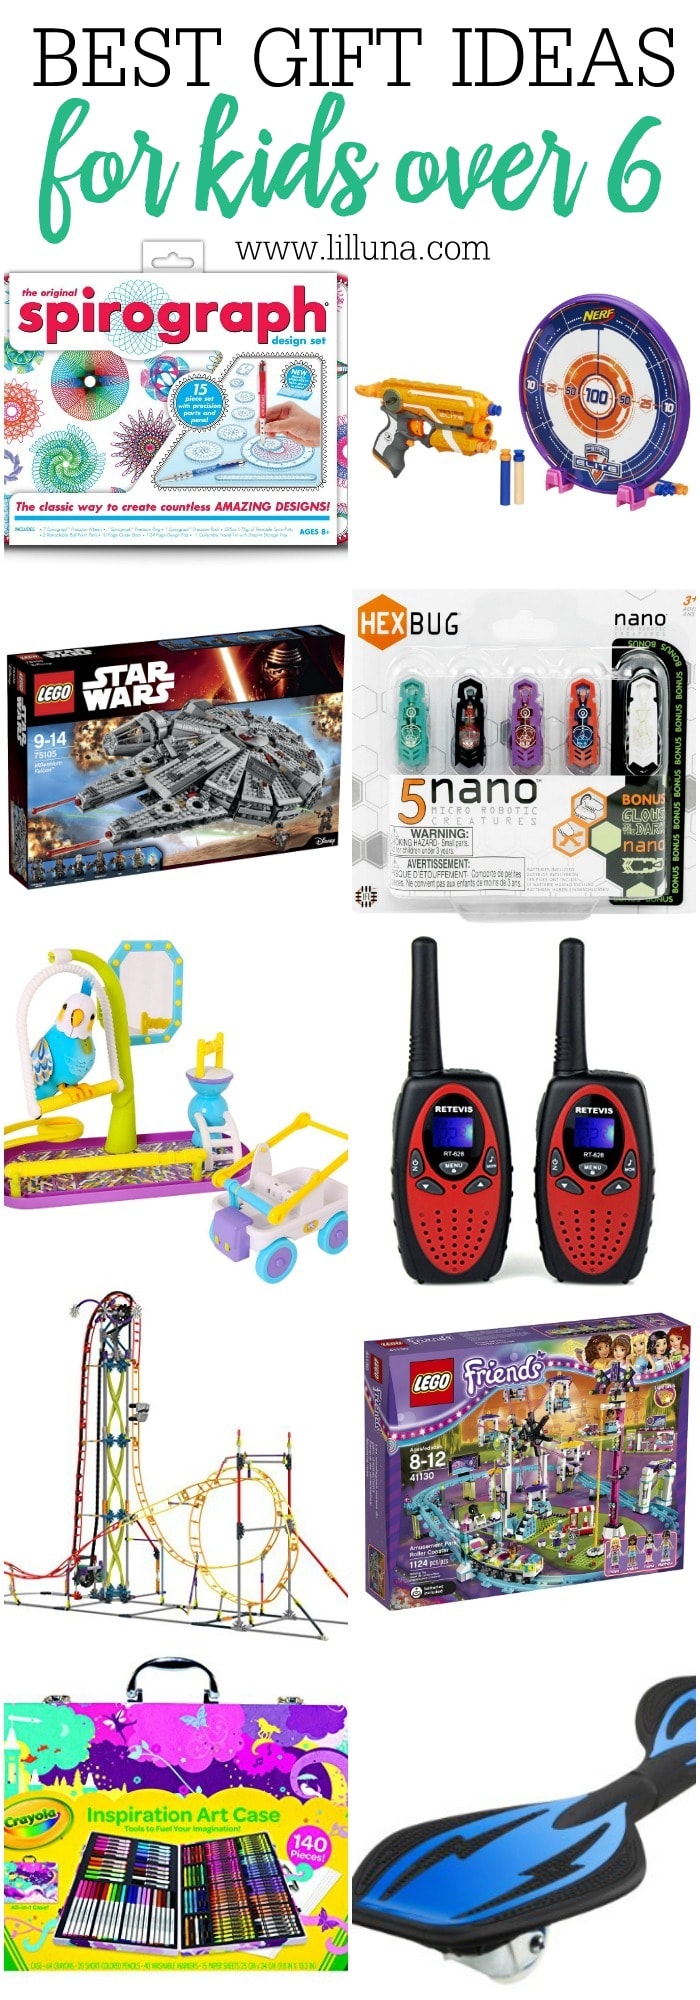 Best Gifts for Kids 6 and Older - great ideas for Christmas or even birthdays, and all are on Amazon!